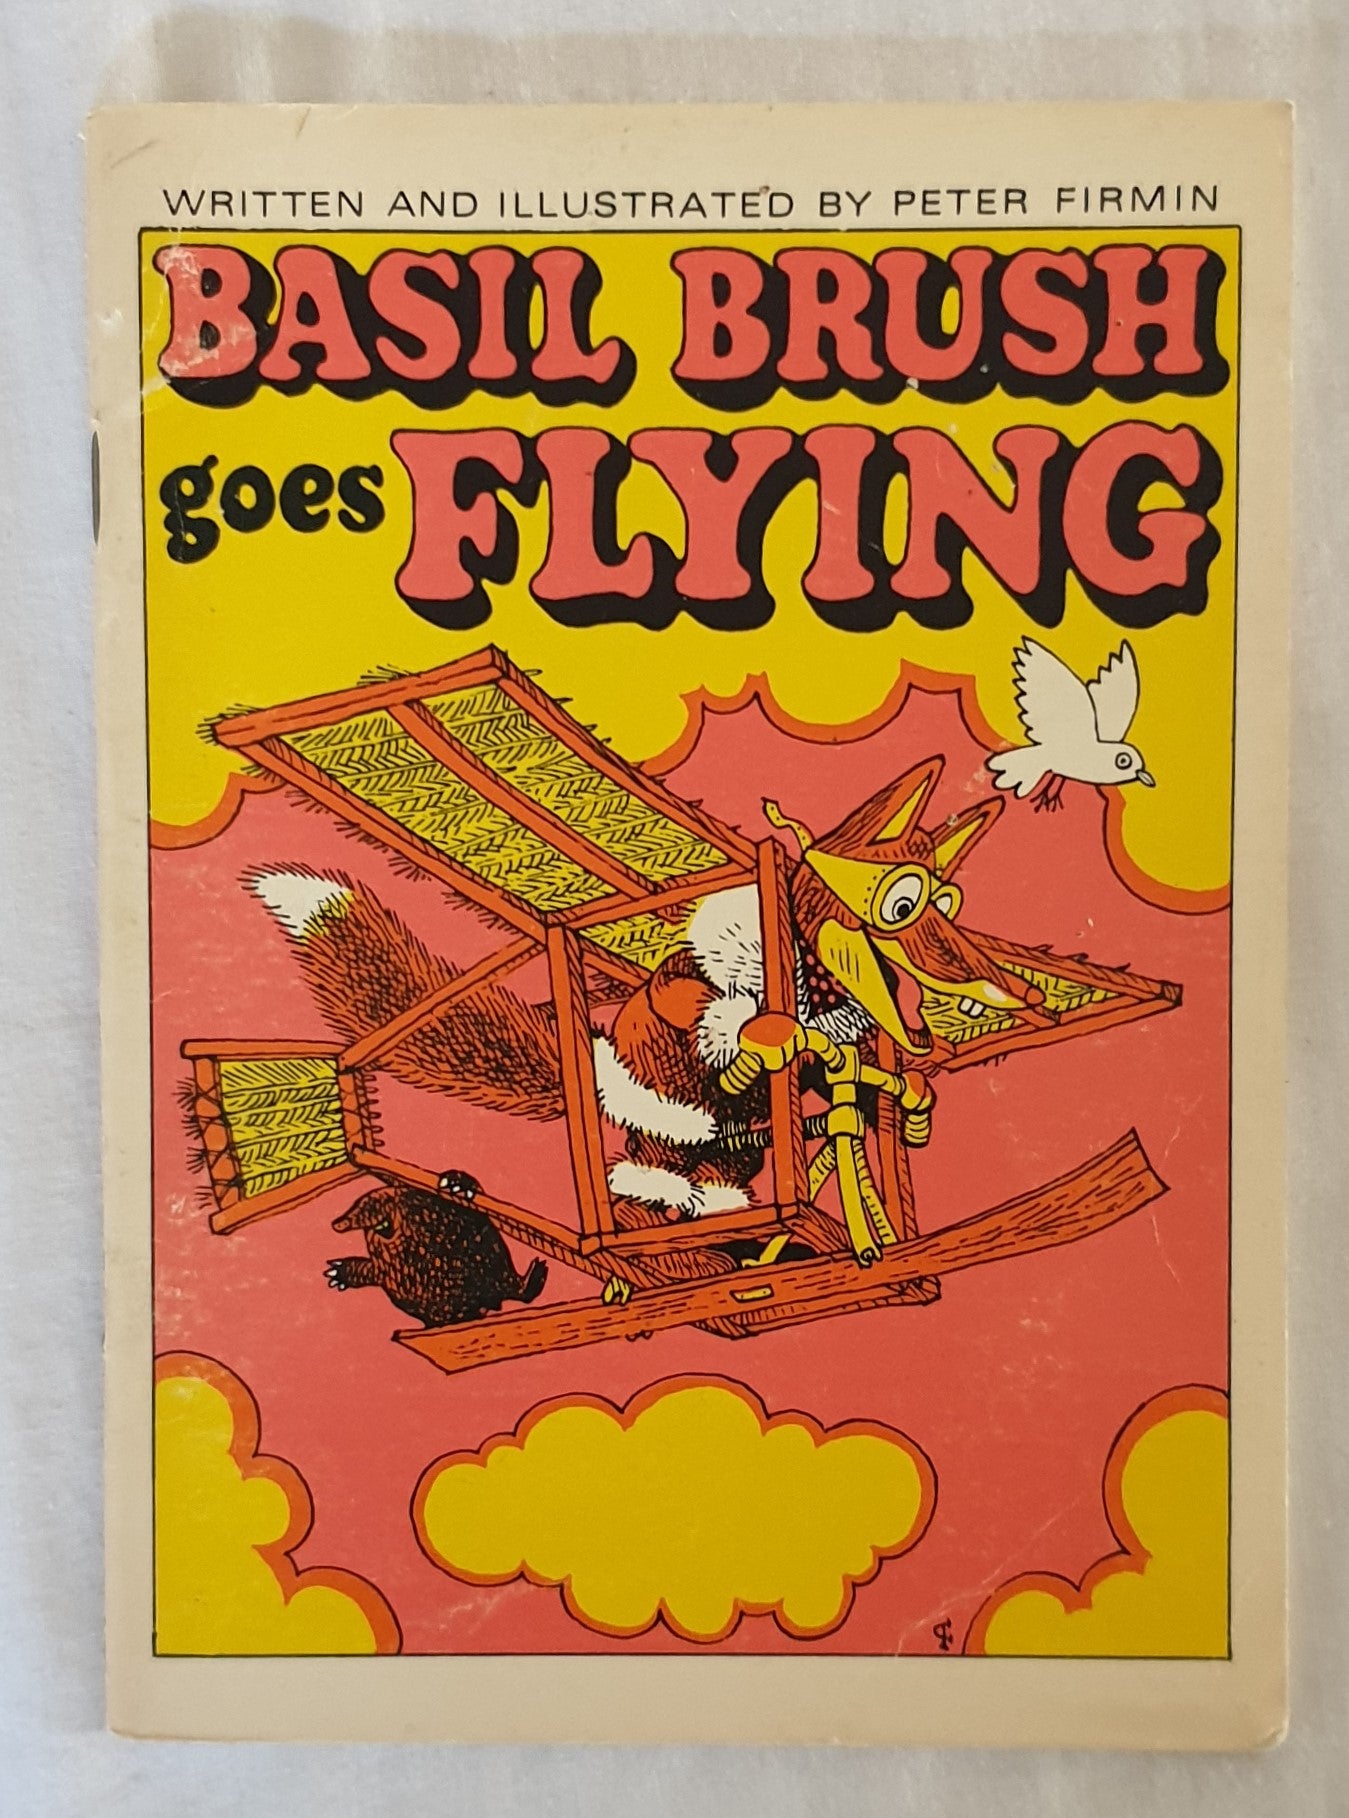 Basil Brush Goes Flying by Peter Firmin